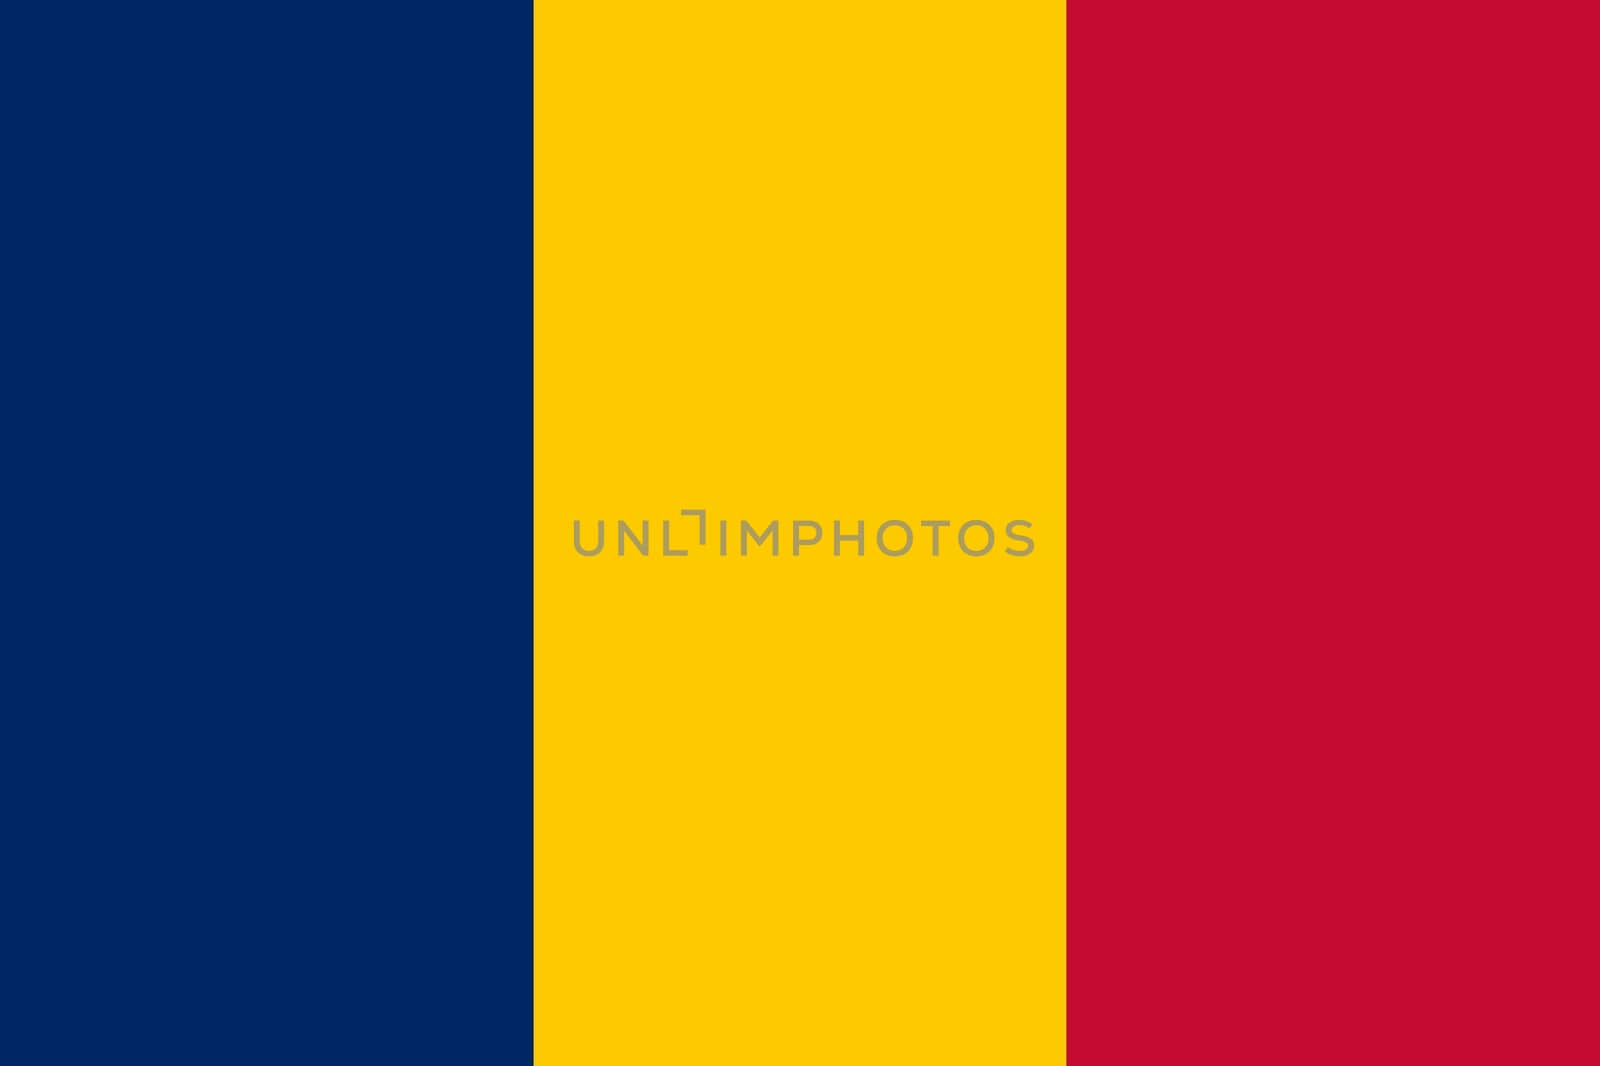 The national flag of the African country of Chad